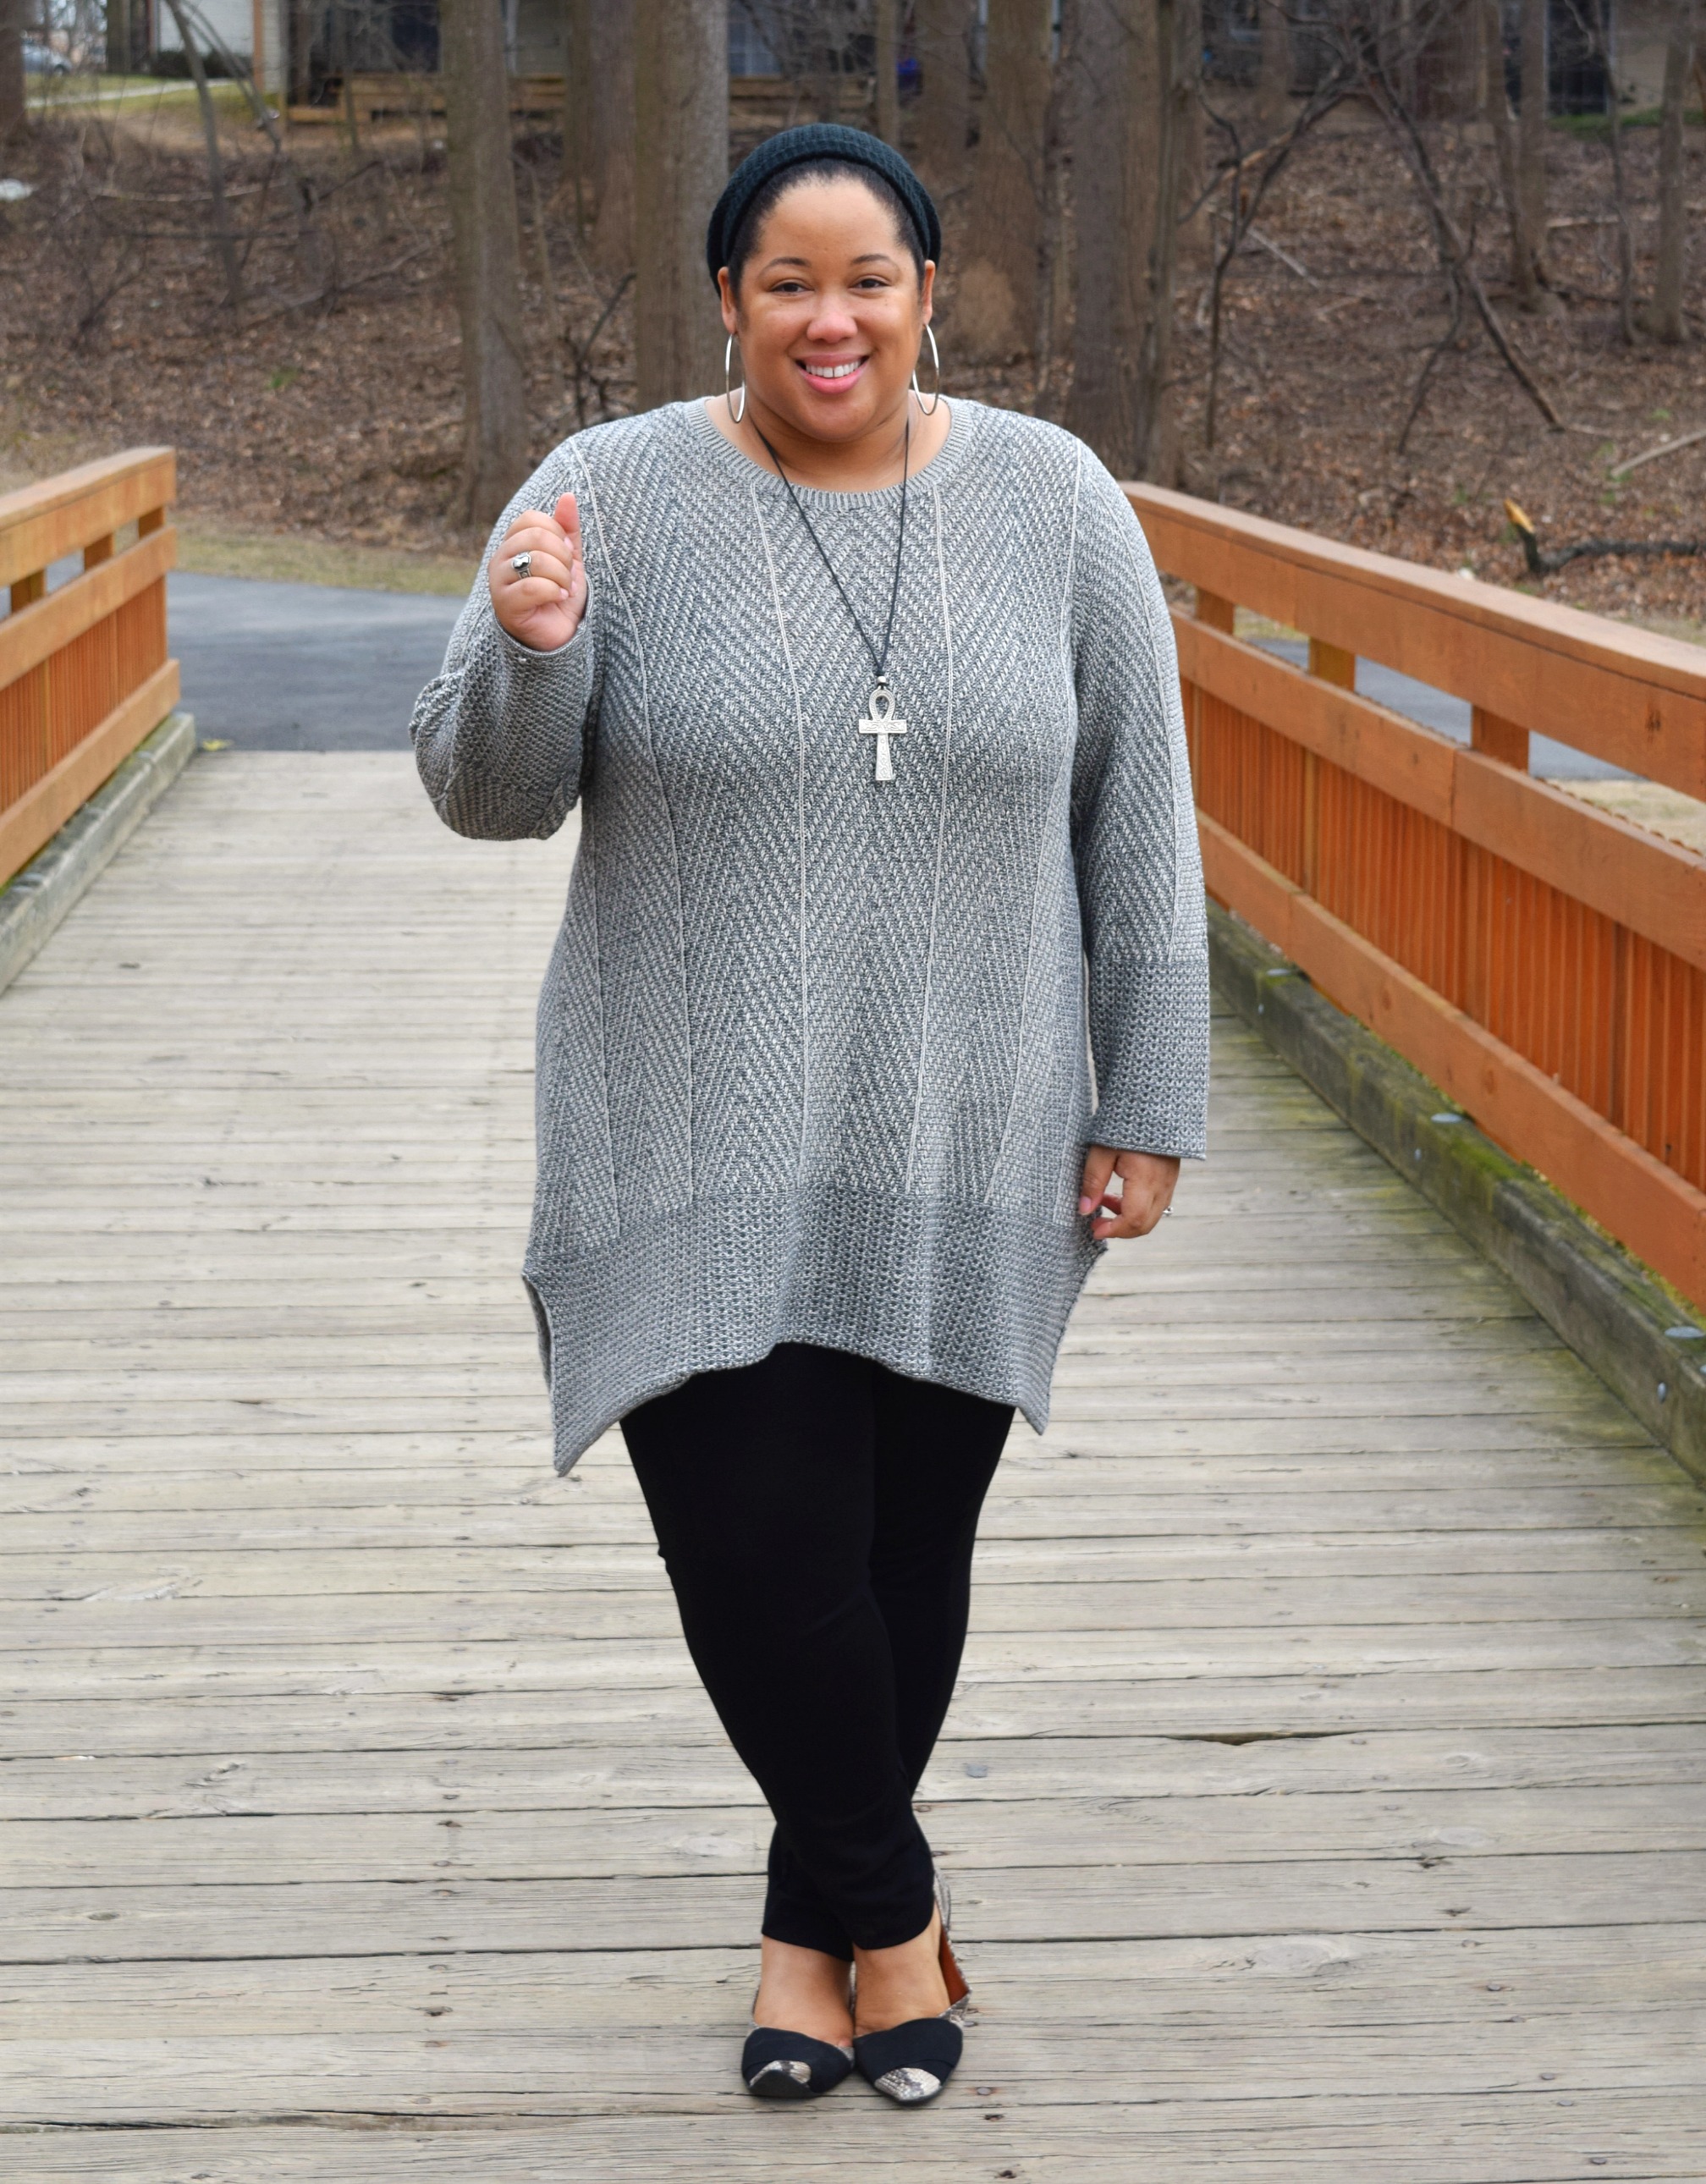 Personal Style | Grey Sweater and Black Leggings